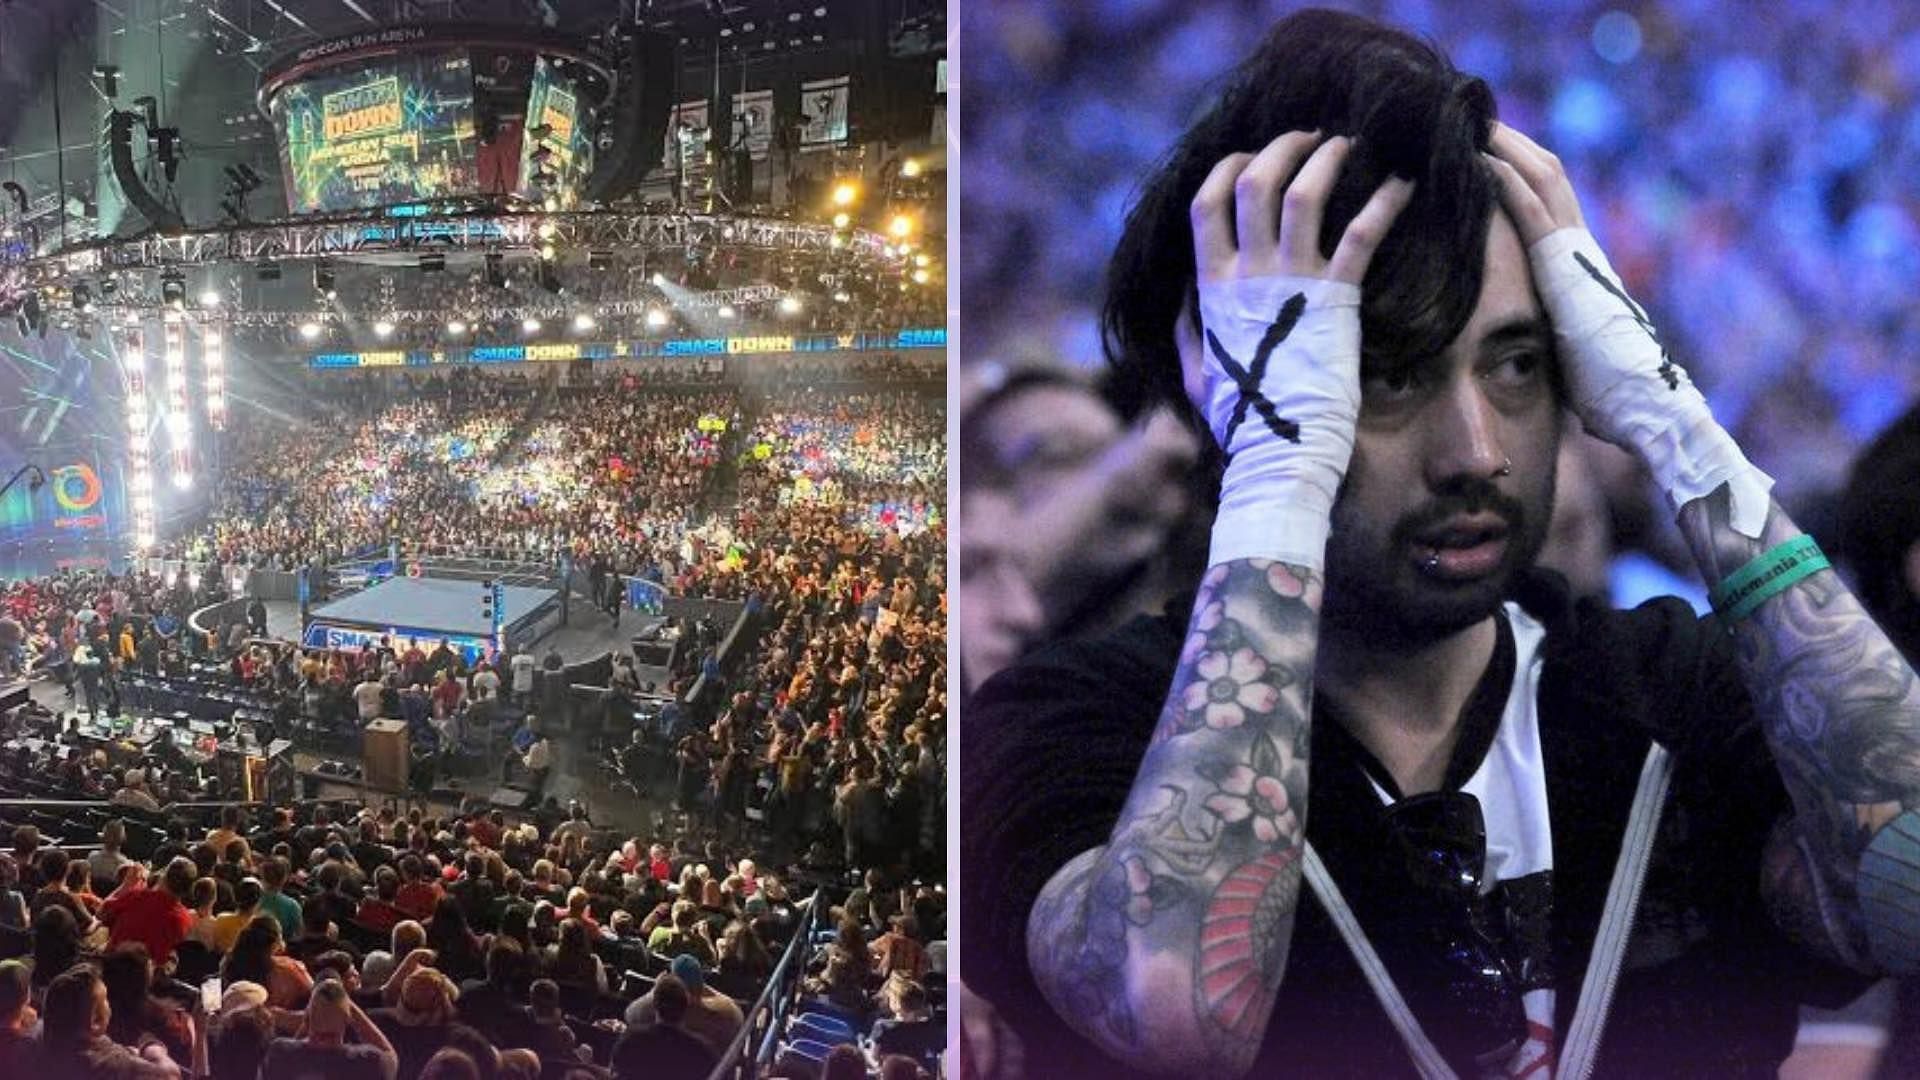 WWE legend shares a message after a turbulent weekend in the industry